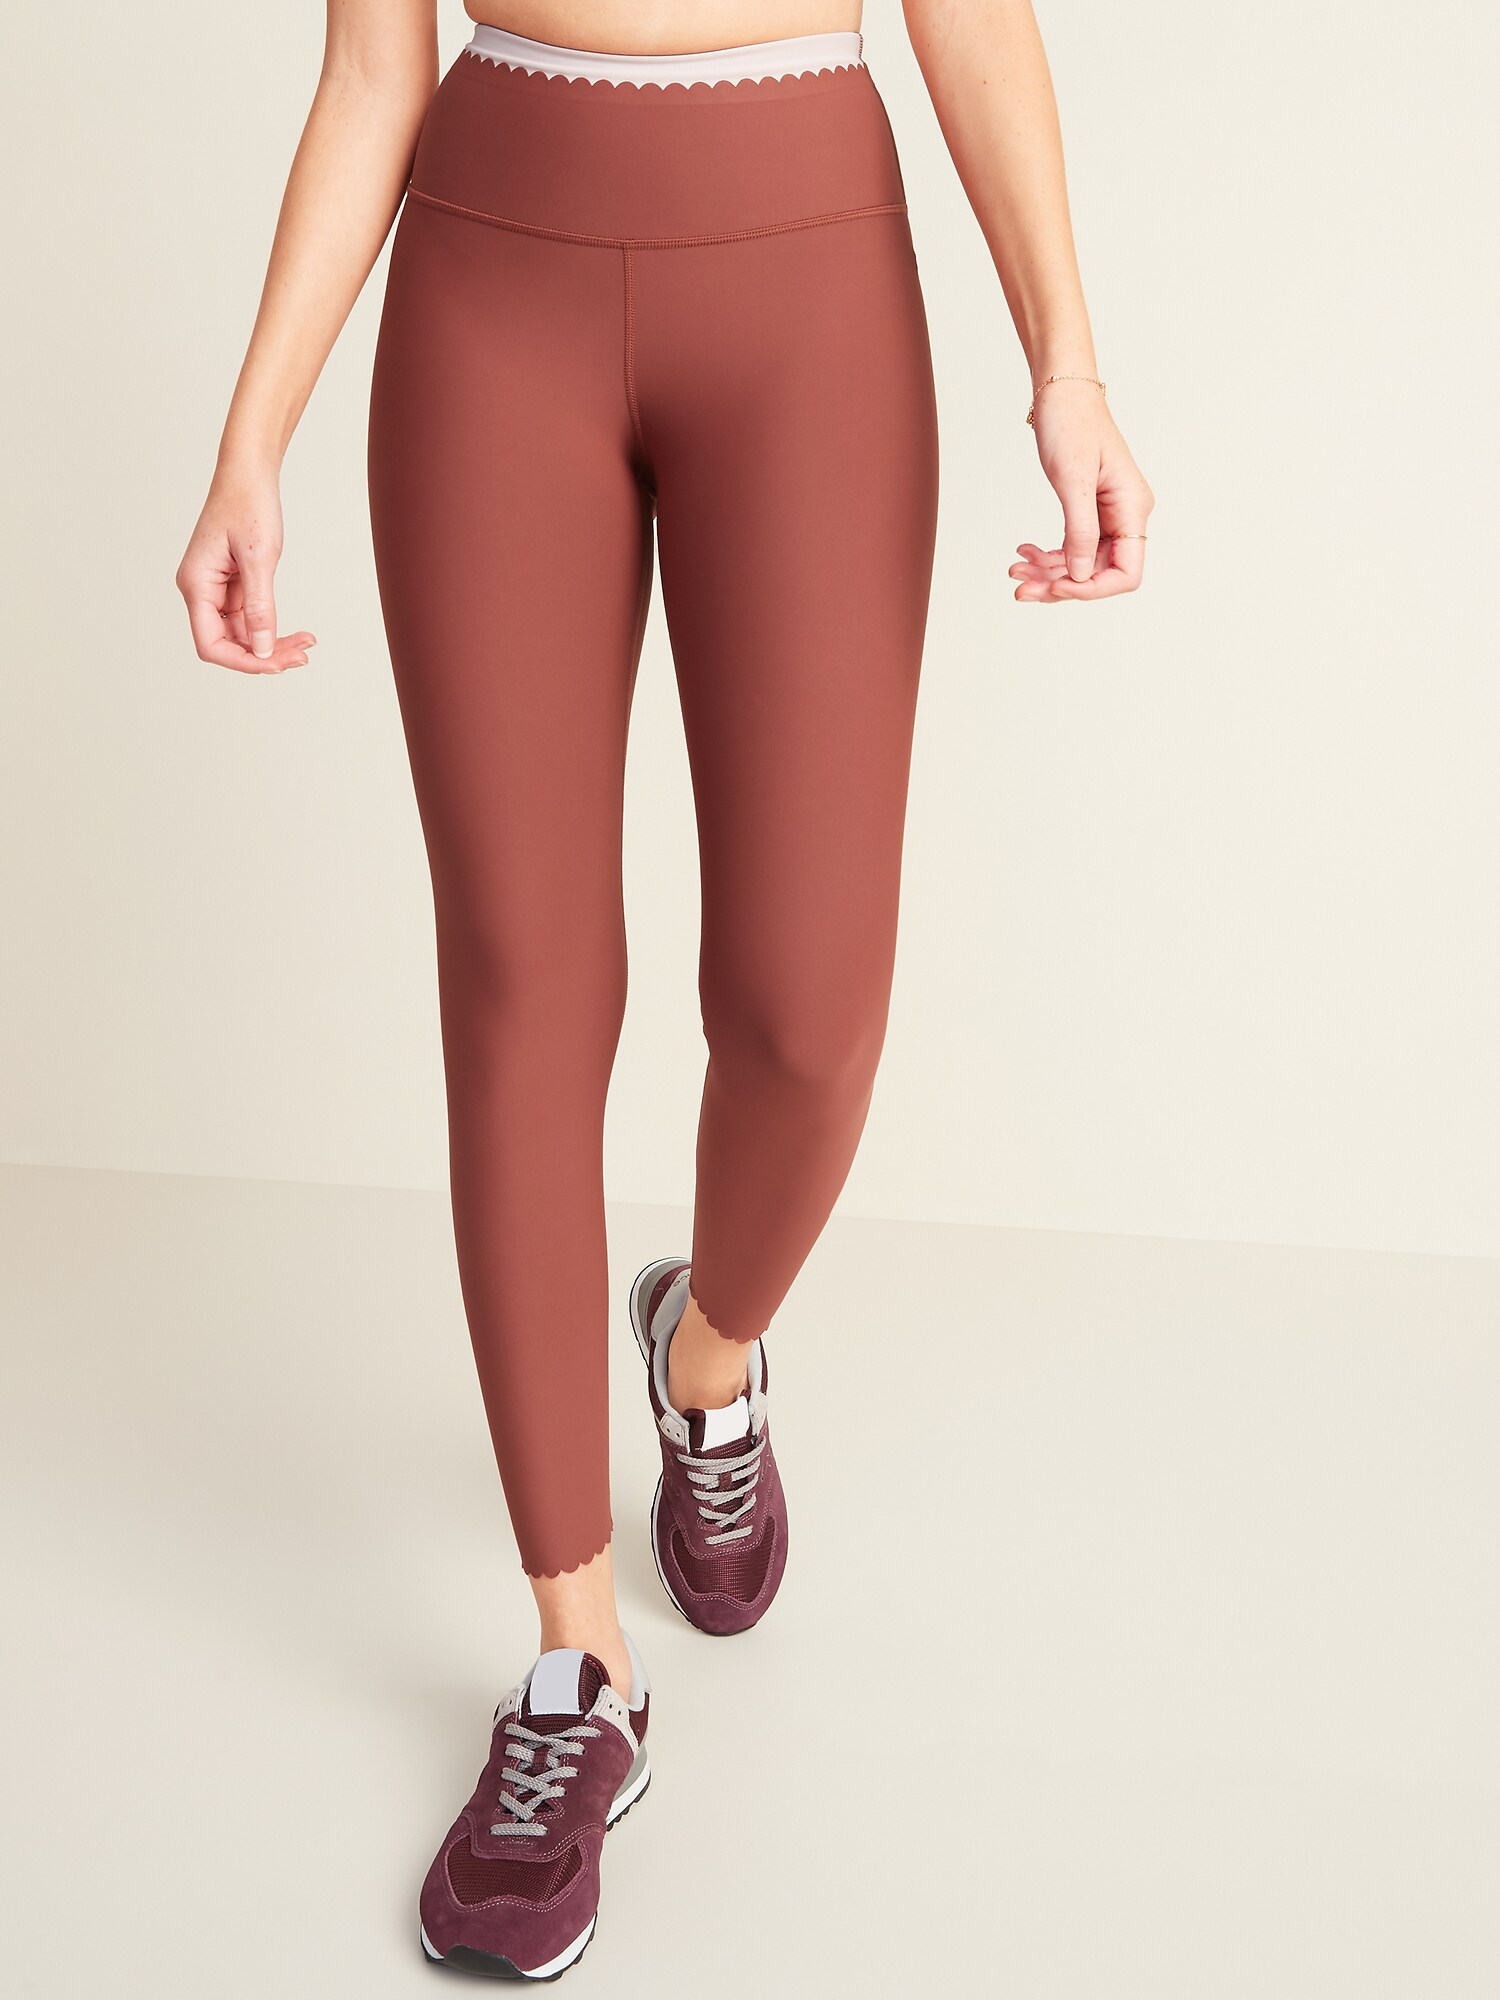 IVL Collective Scallop Active High Waist Leggings - ShopStyle